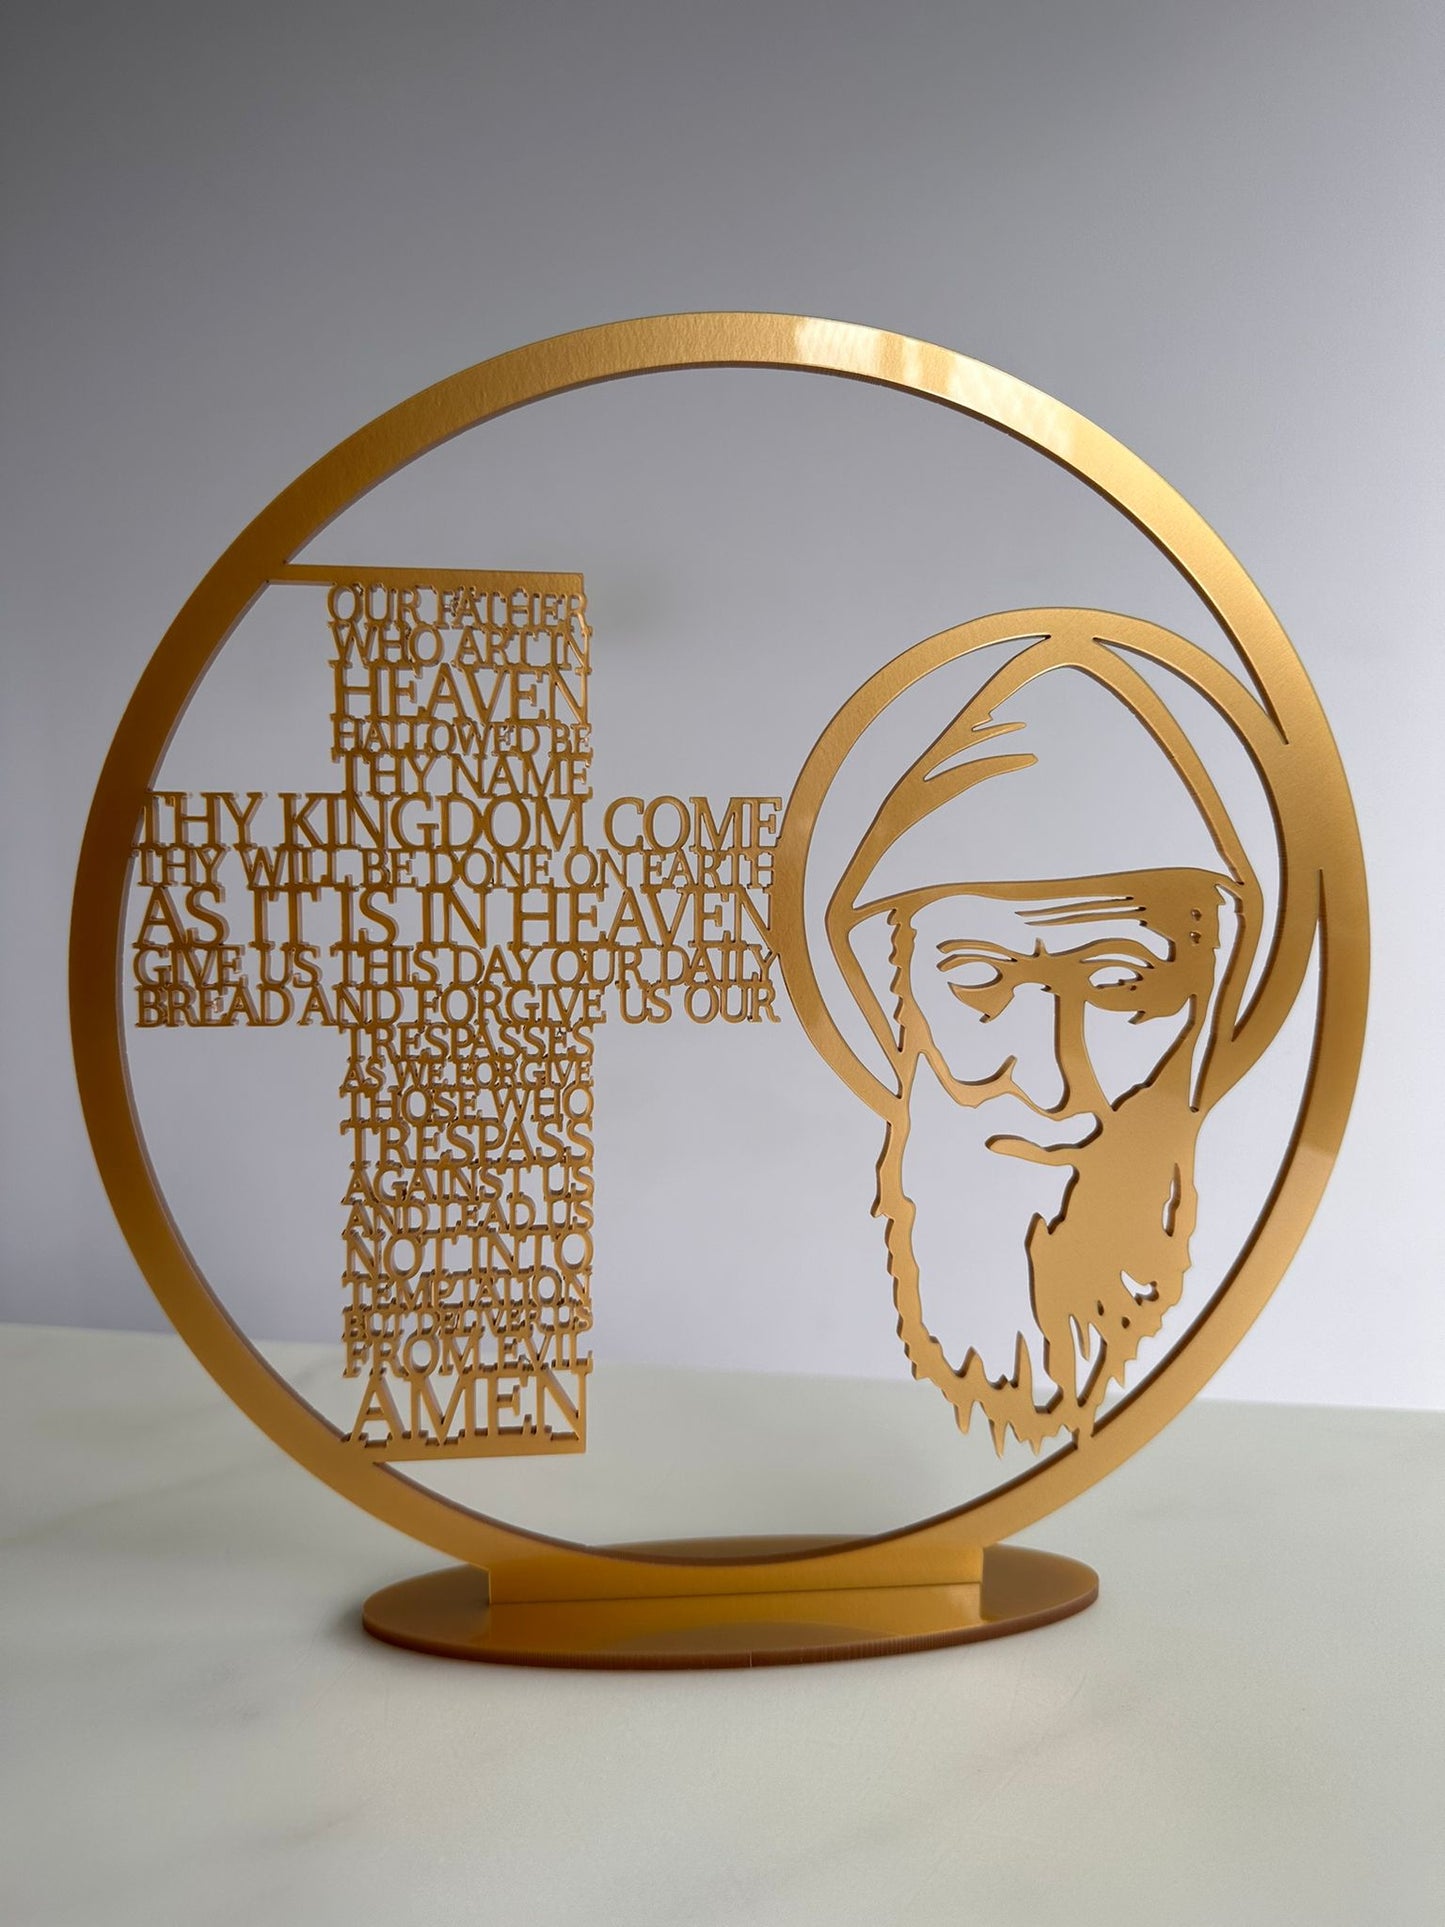 St Charbel and Lords Prayer on a stand